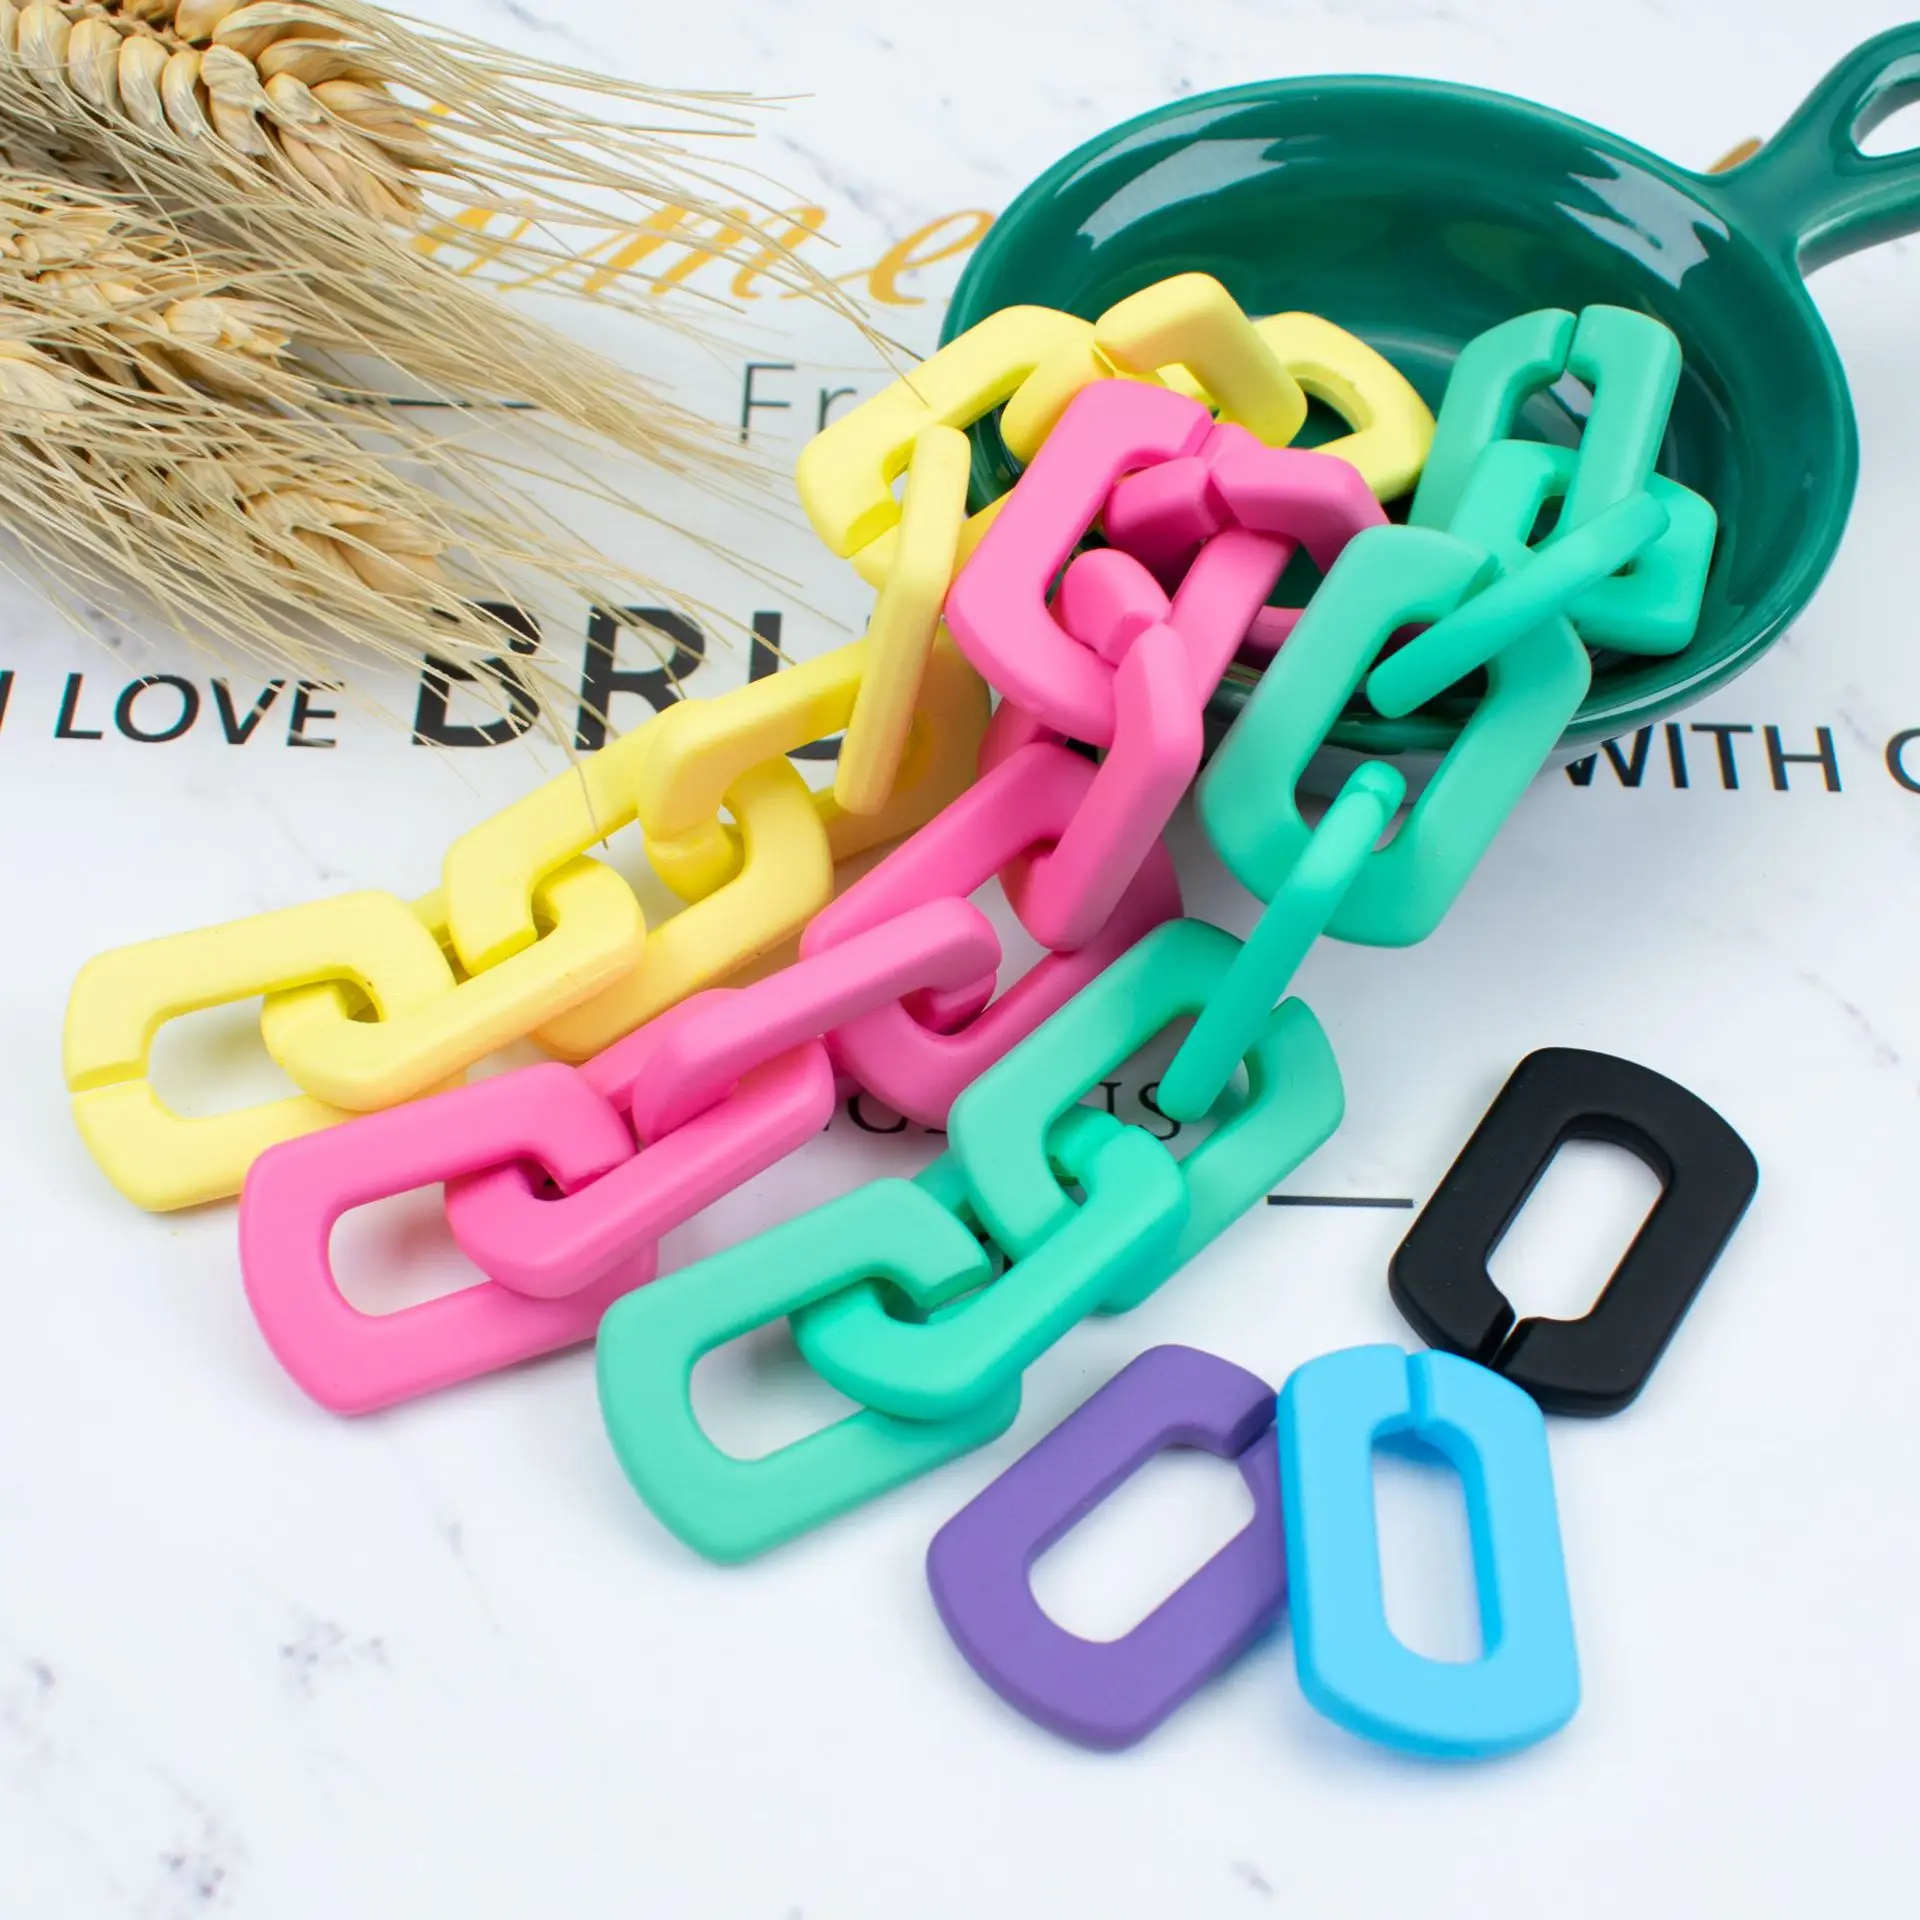 50pcs/lot 30*20mm Rubber Color Acrylic Buckle Beads DIY Glasses Chains Mask Chain Earrings Necklace Mobile Chains Accessory N227